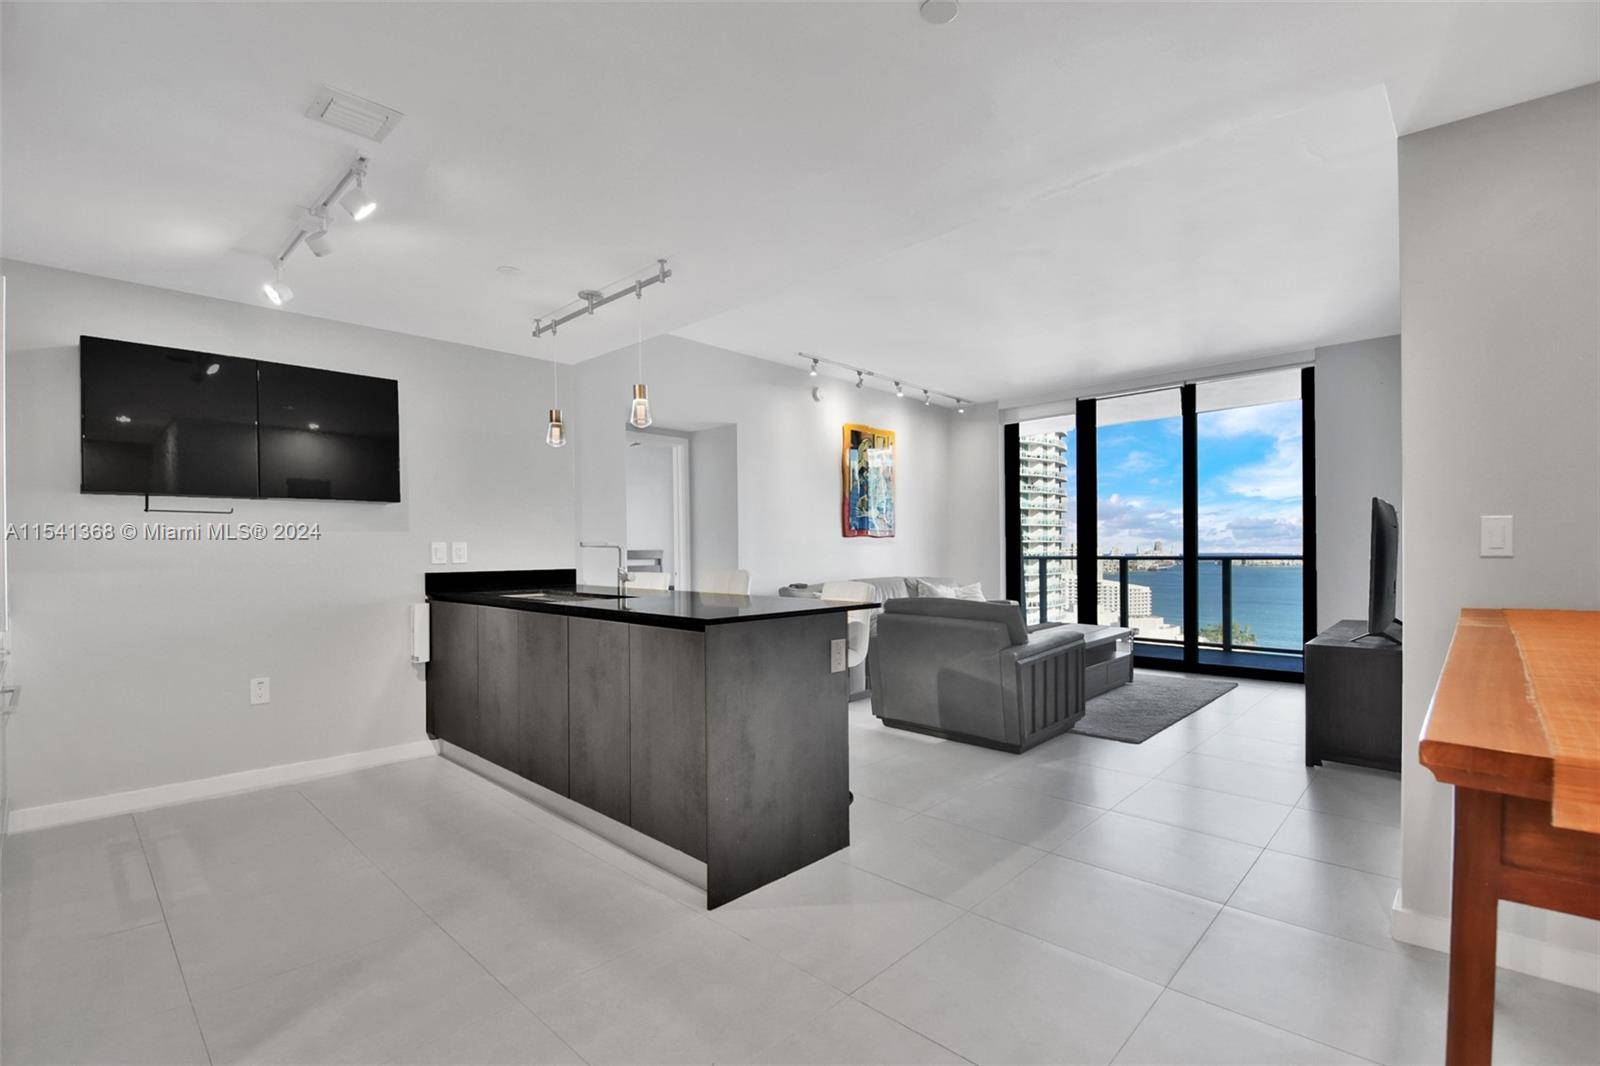 Excellent chance to rent a fully furnished home in one of Brickell's highly desired buildings.